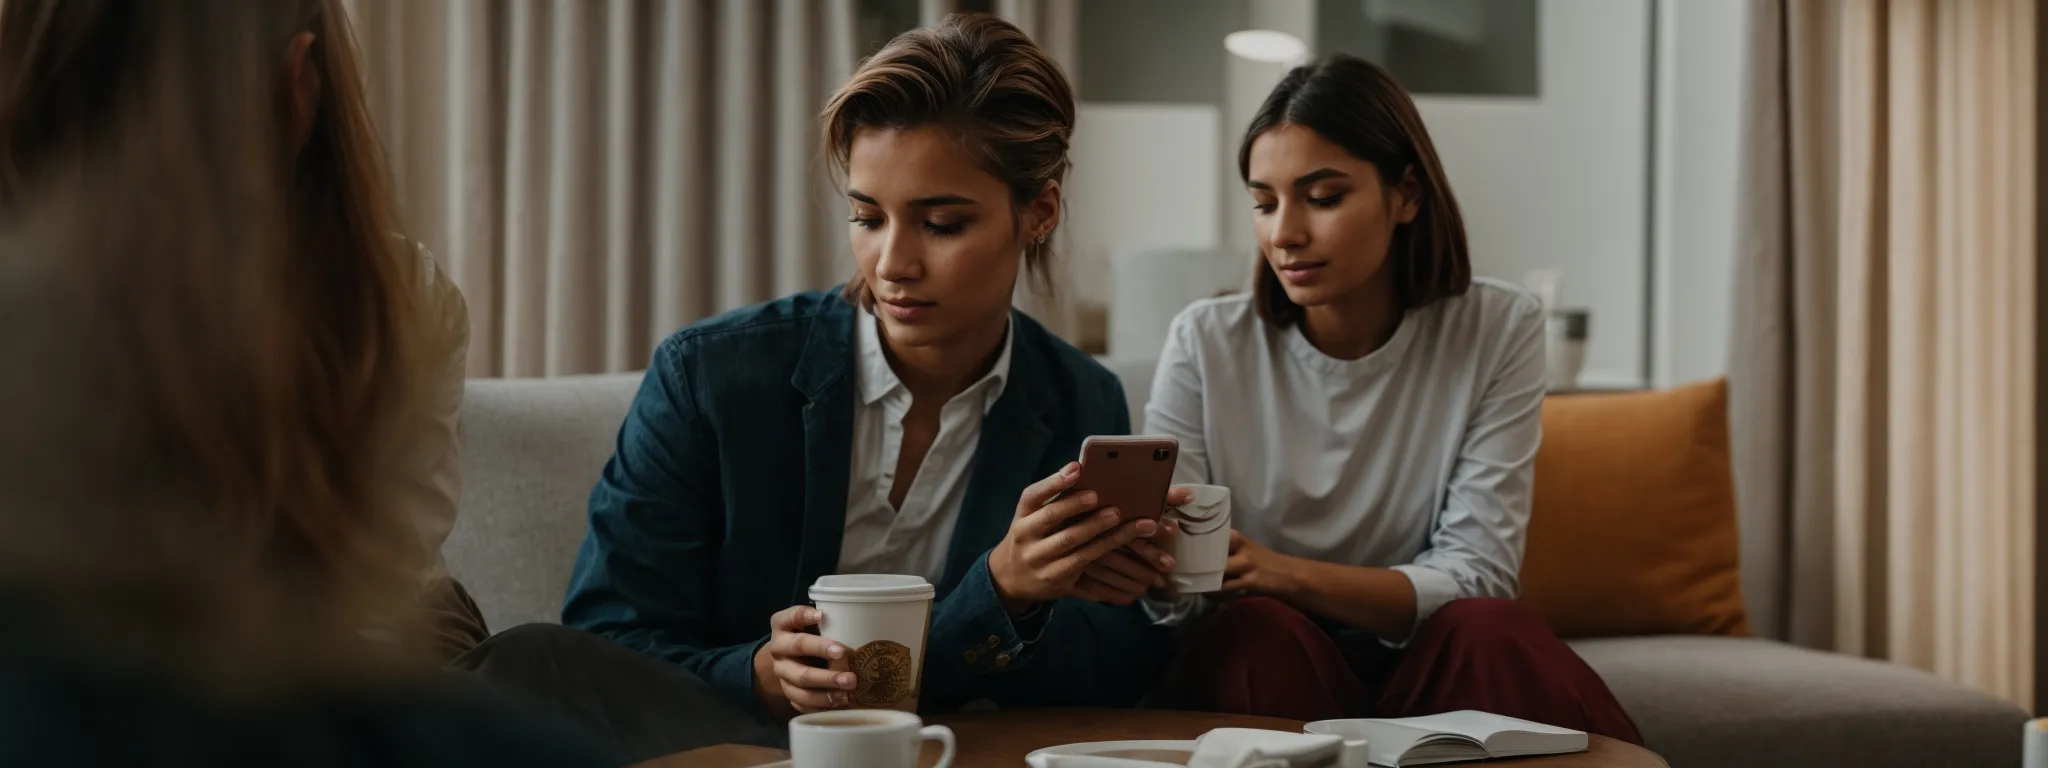 two people, casually dressed, sit at a modern coffee table with smartphones and a coffee cup, looking poised for a creative planning session.